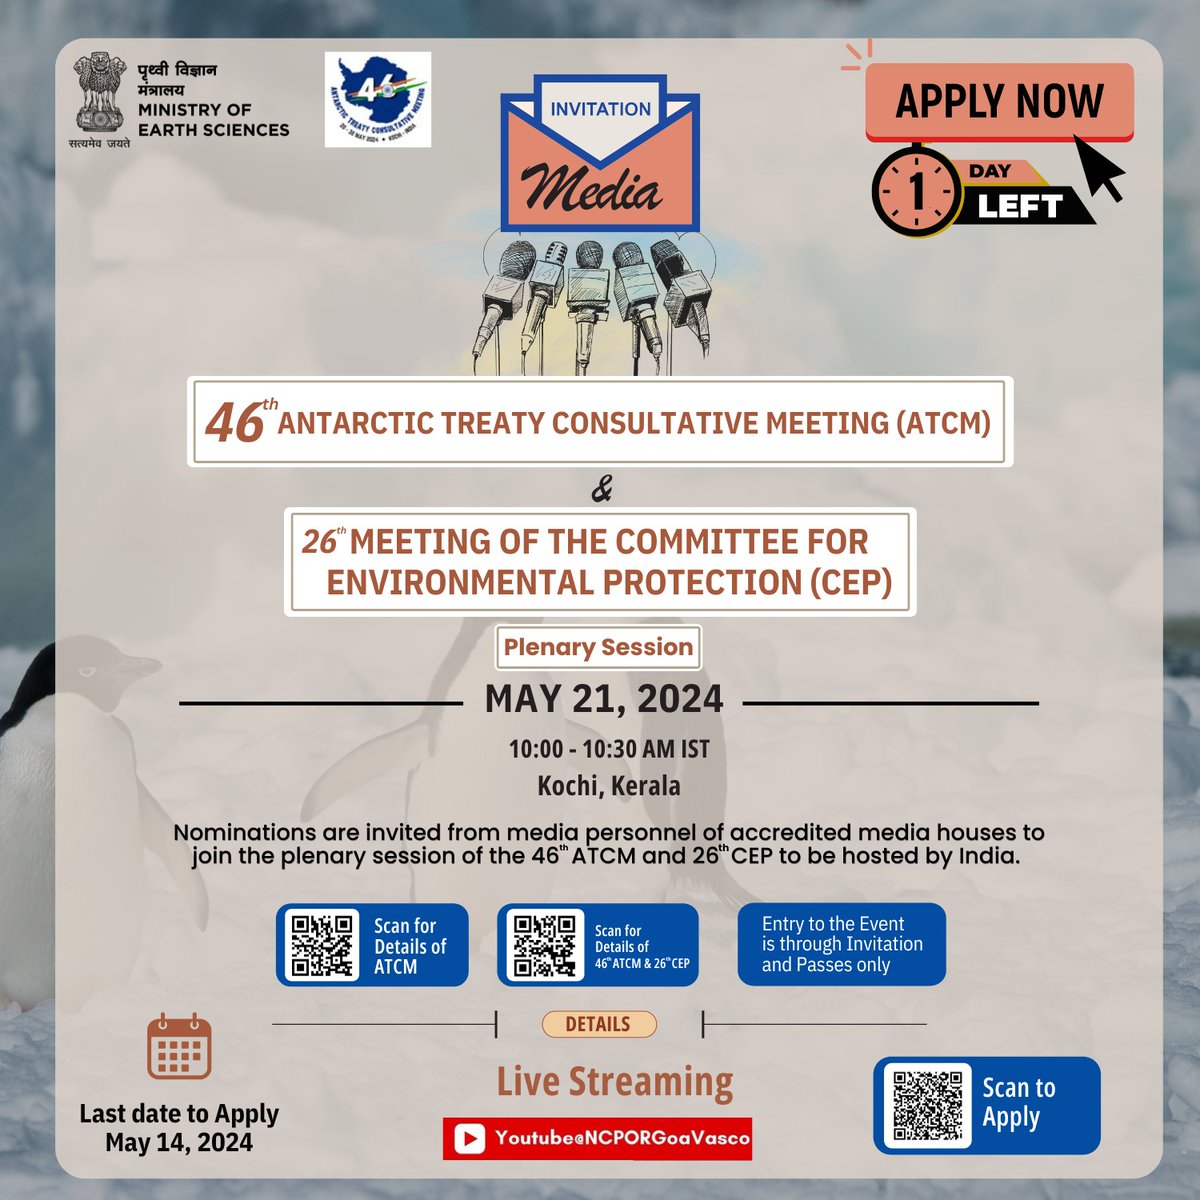 #1DayToGo
Attention Media!
Applications from media colleagues are welcome for certain proceedings of the plenary session of the 46th ATCM, hosted by India on May 21, 2024, from 10-10:30 AM IST.
Apply at: forms.gle/TpeZJZkaXBbQdr… by May 14, 2024 and grab your passes.